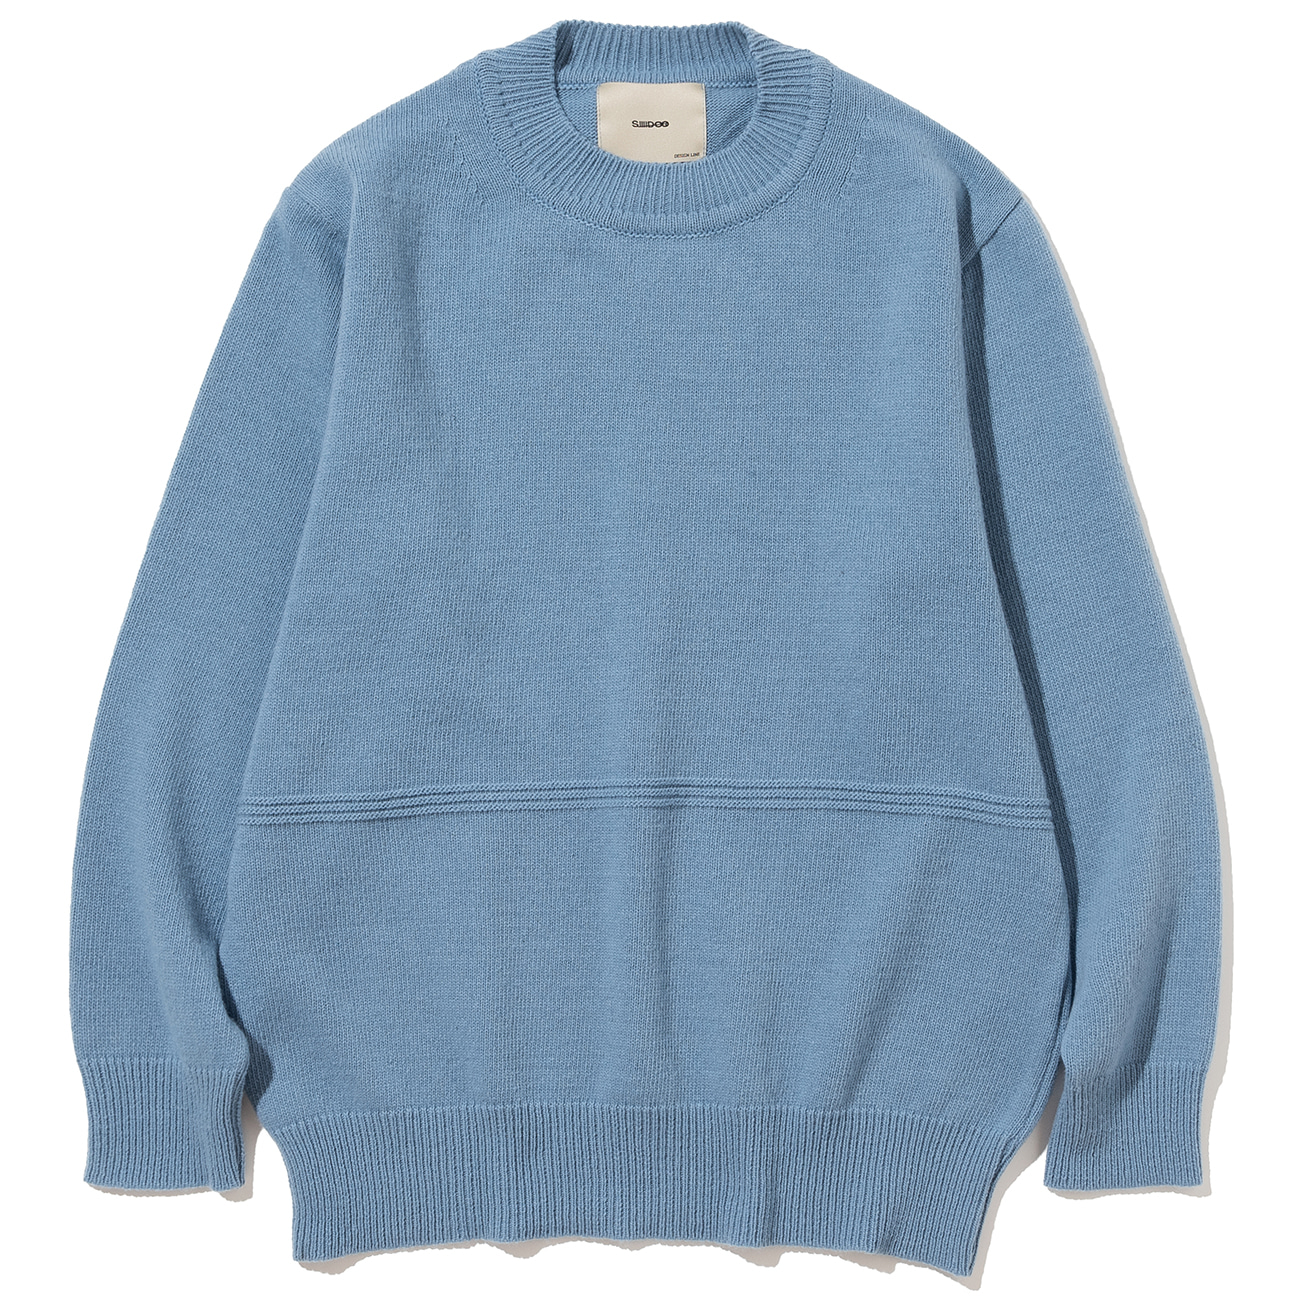 FT LINE LAMBSWOOL ROUND KNIT #1(2nd restock)